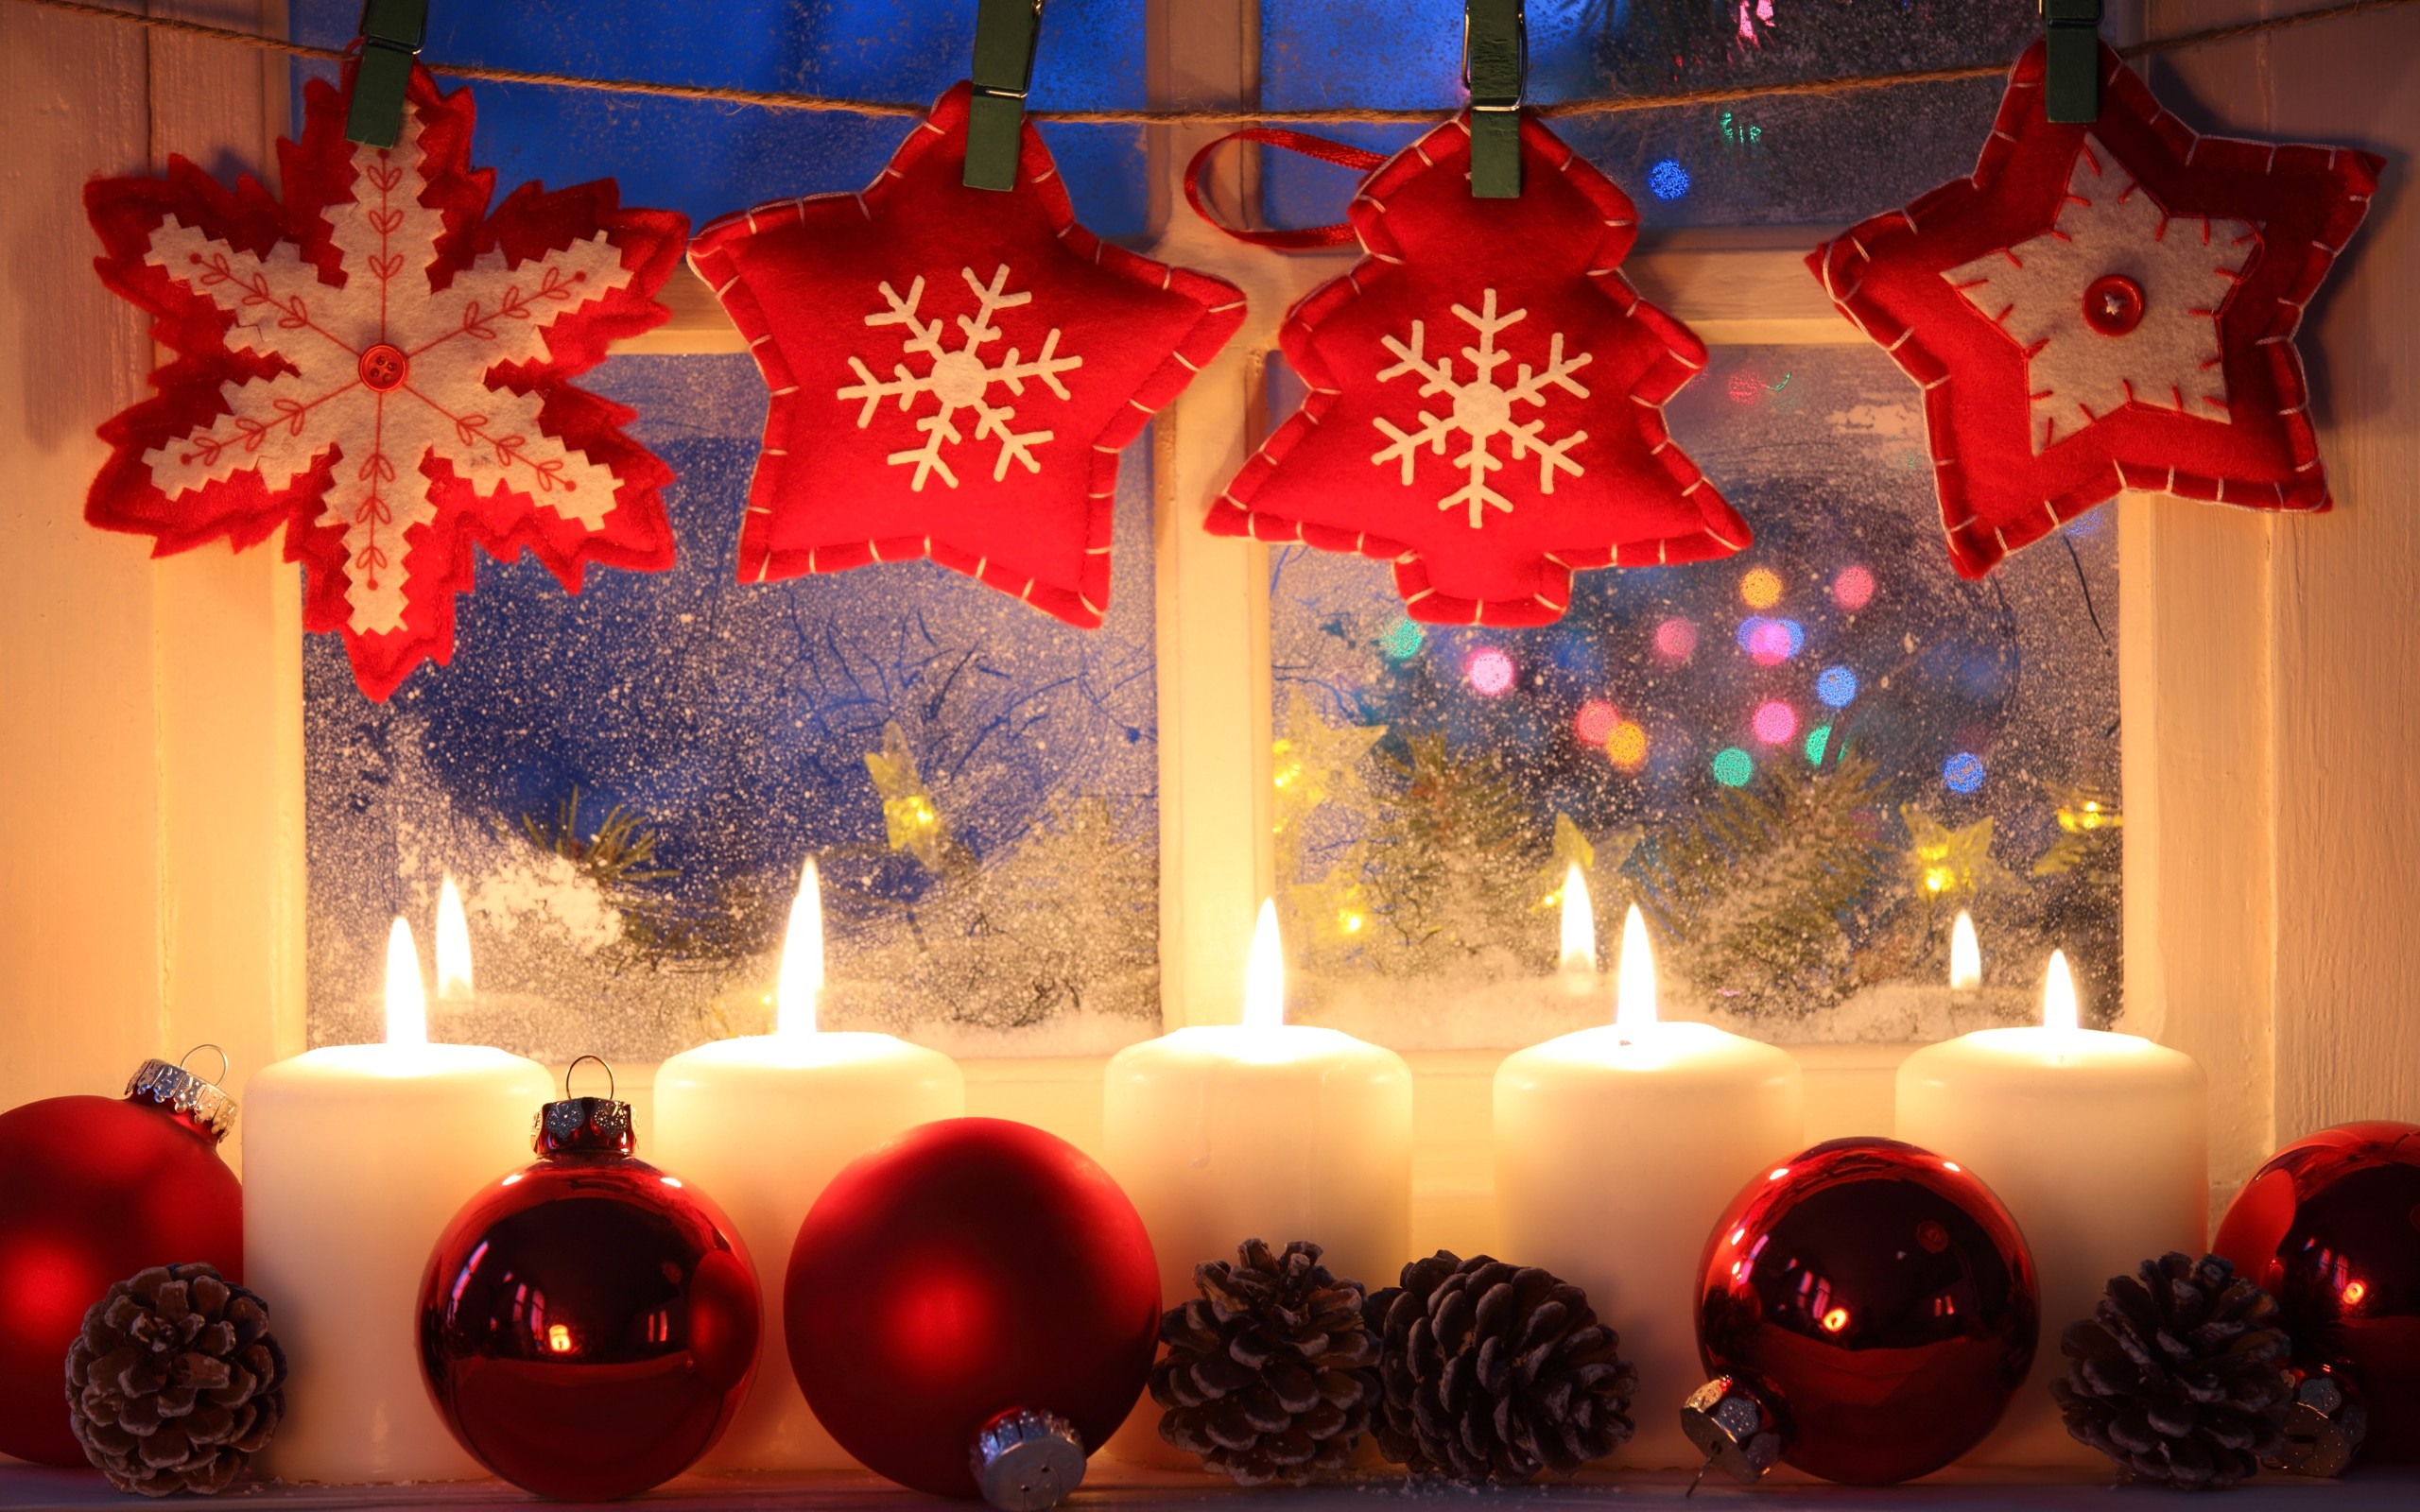 New Year Christmas Ornaments Candles Cones Window Decorations Bokeh 2560x1600